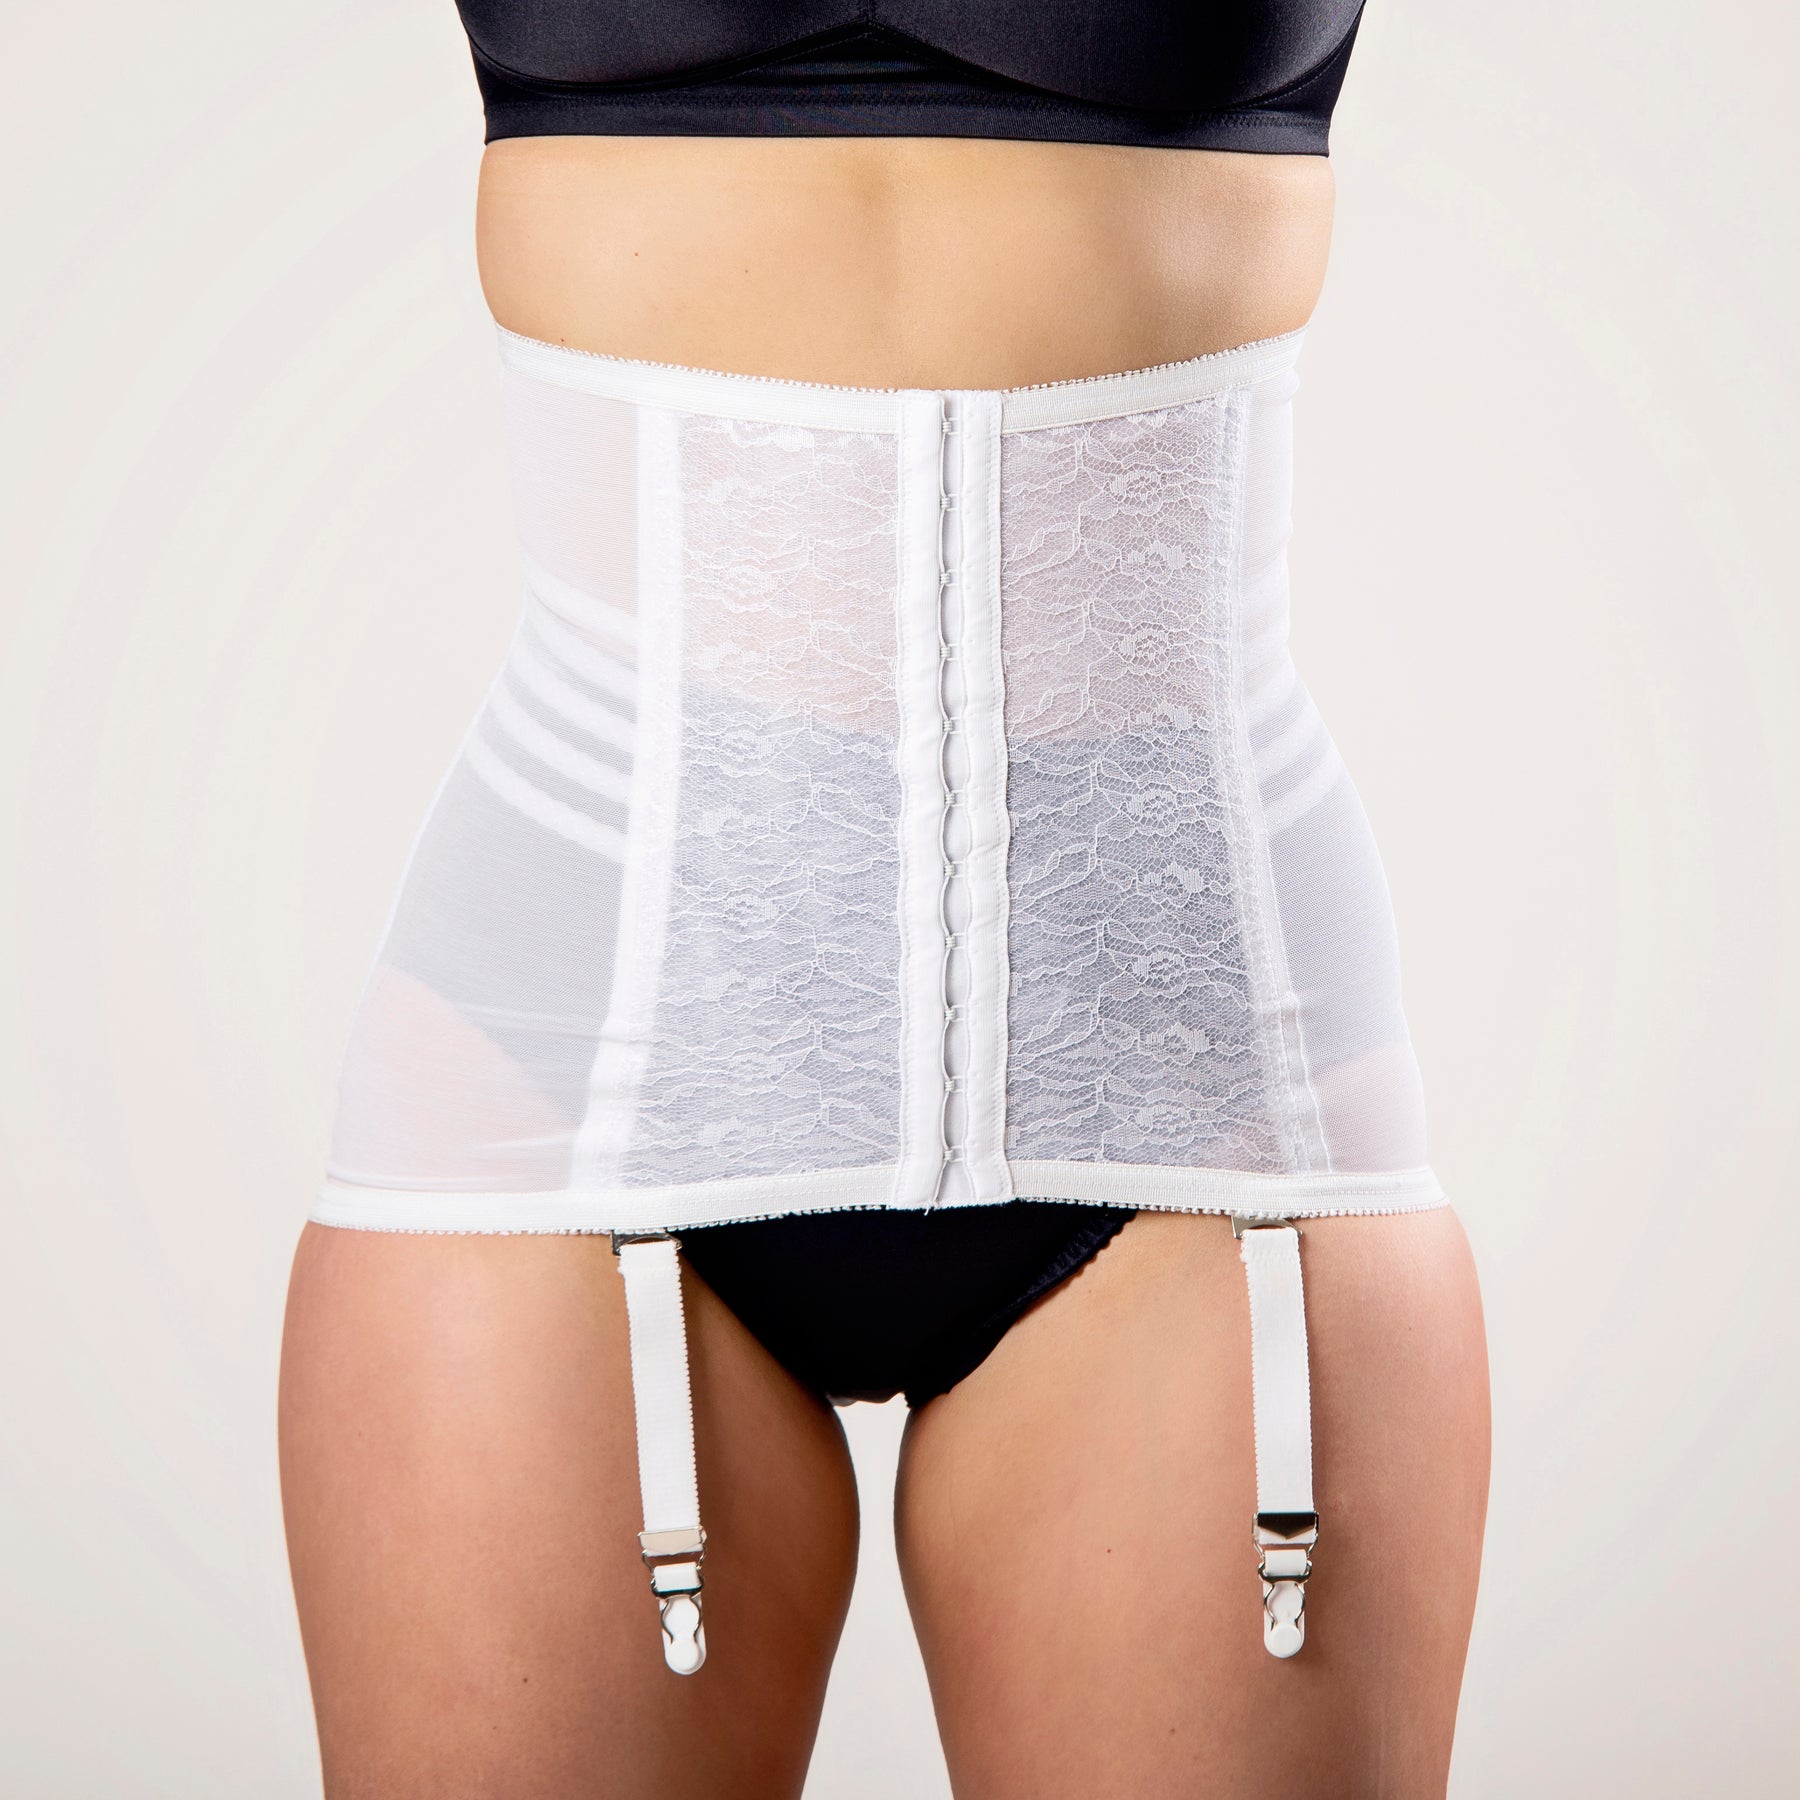 RAGO STYLE 21 – WAIST TRAINER / GIRDLE WITH GARTERS FIRM SHAPING